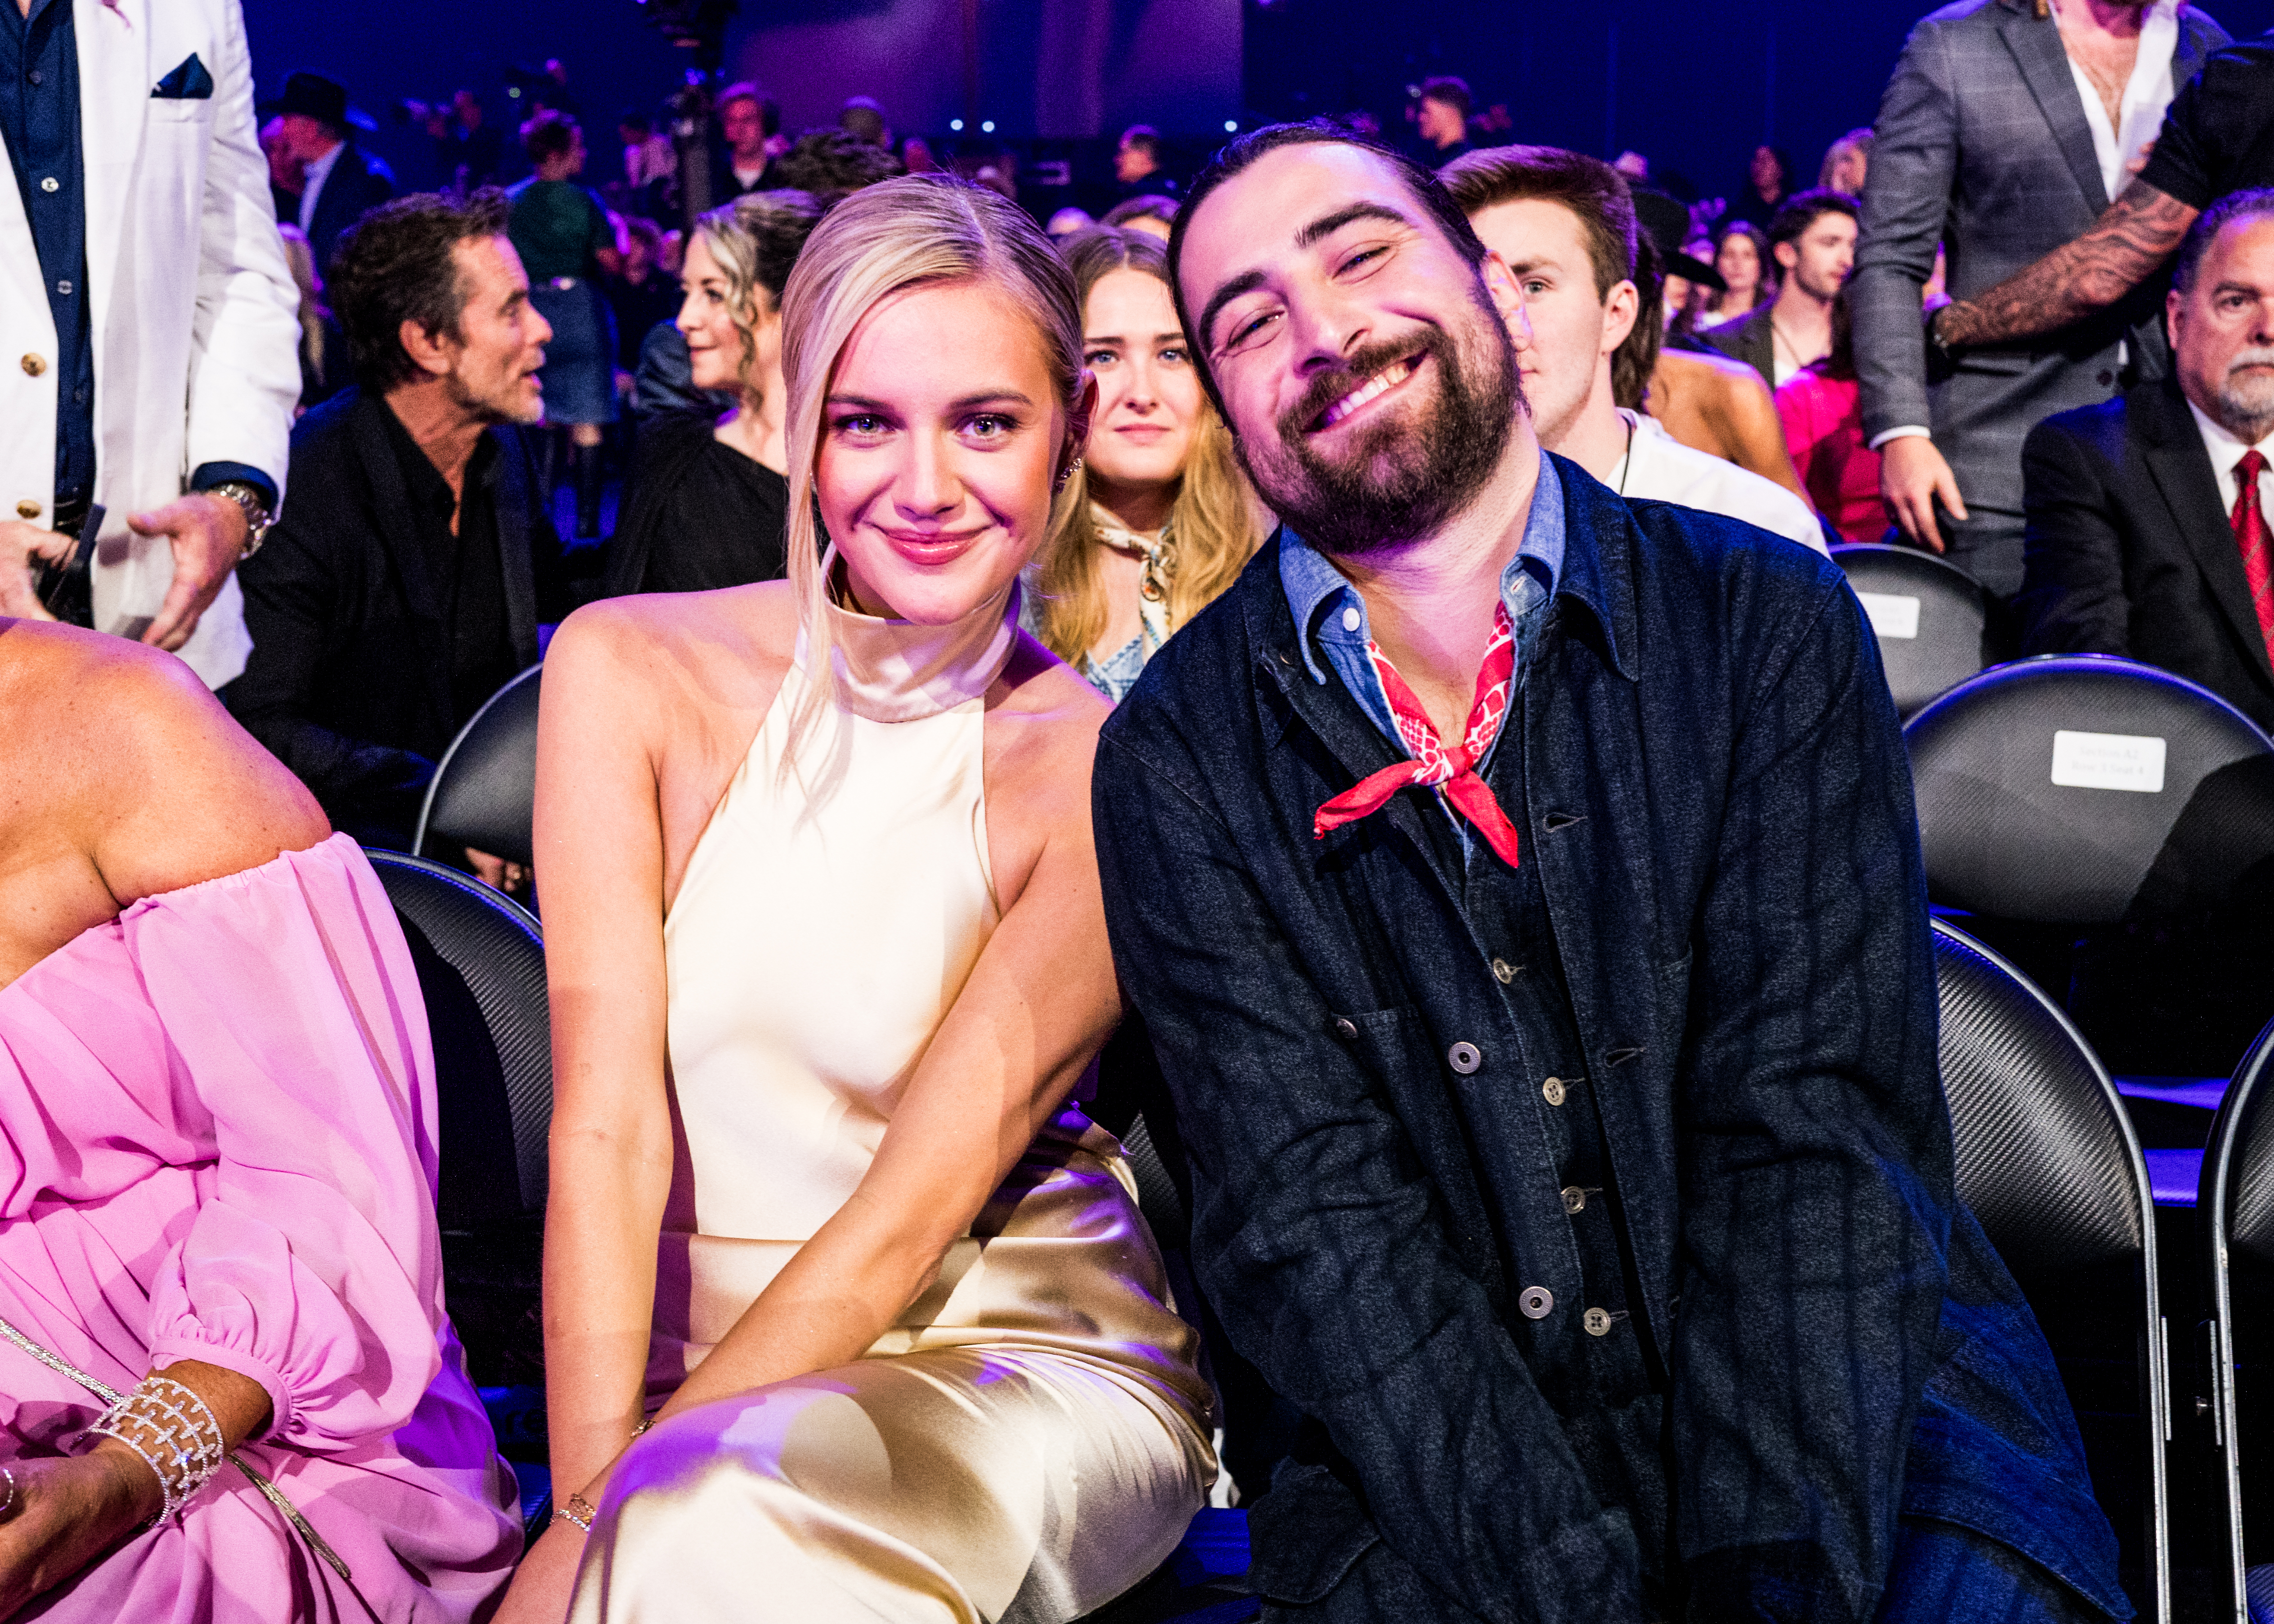 Above, Kelsea Ballerini sat with Noah Kahan at the 59th Academy of Country Music Awards on May 16